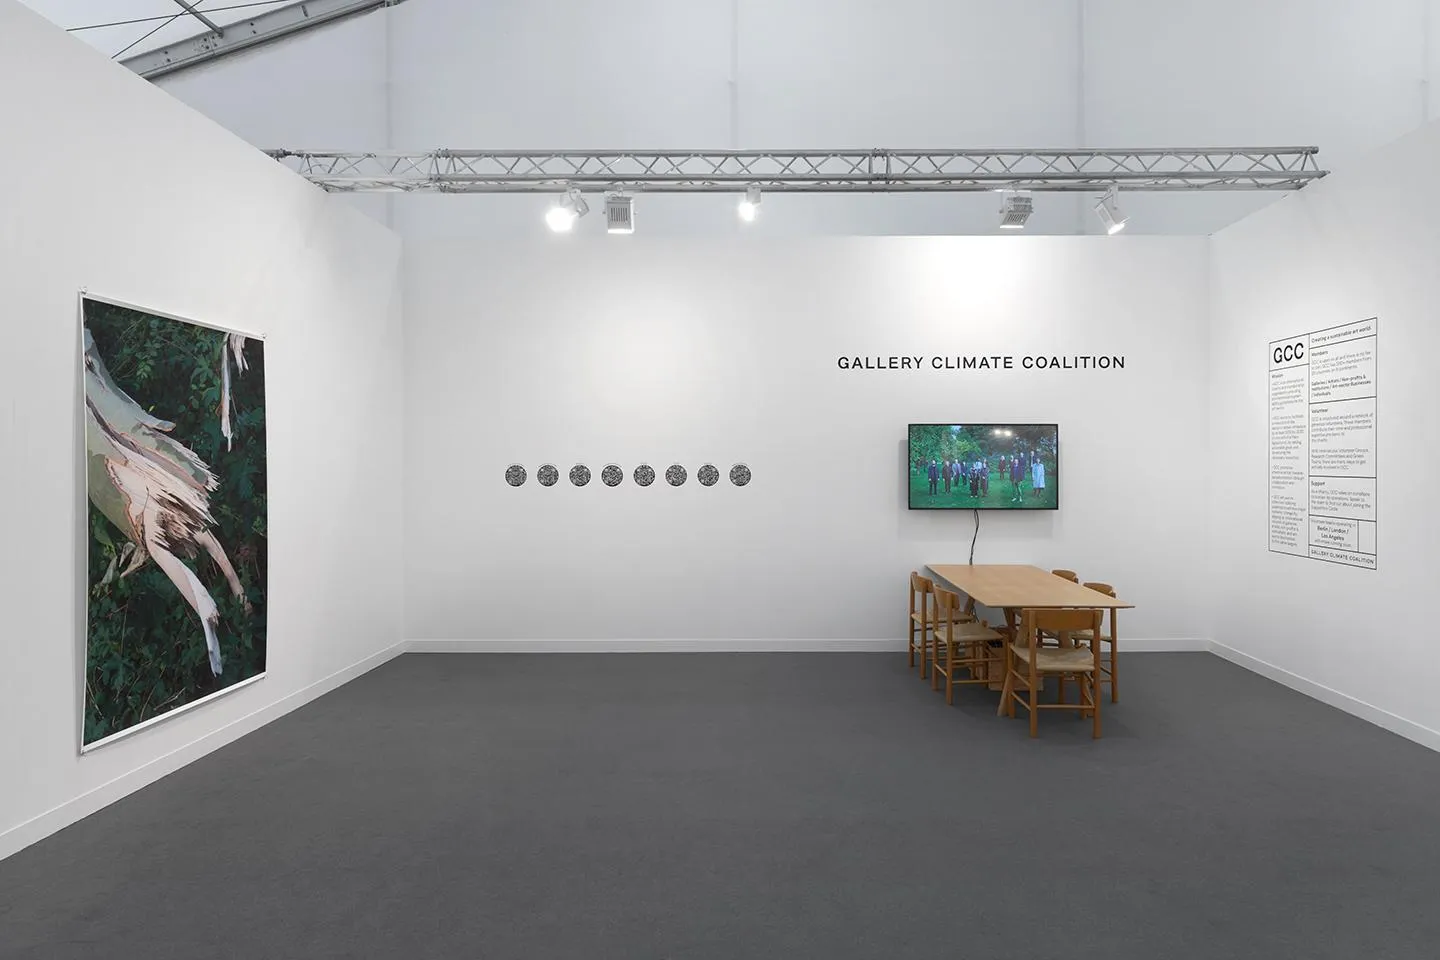 gallery climate coalition, salone milano, frieze